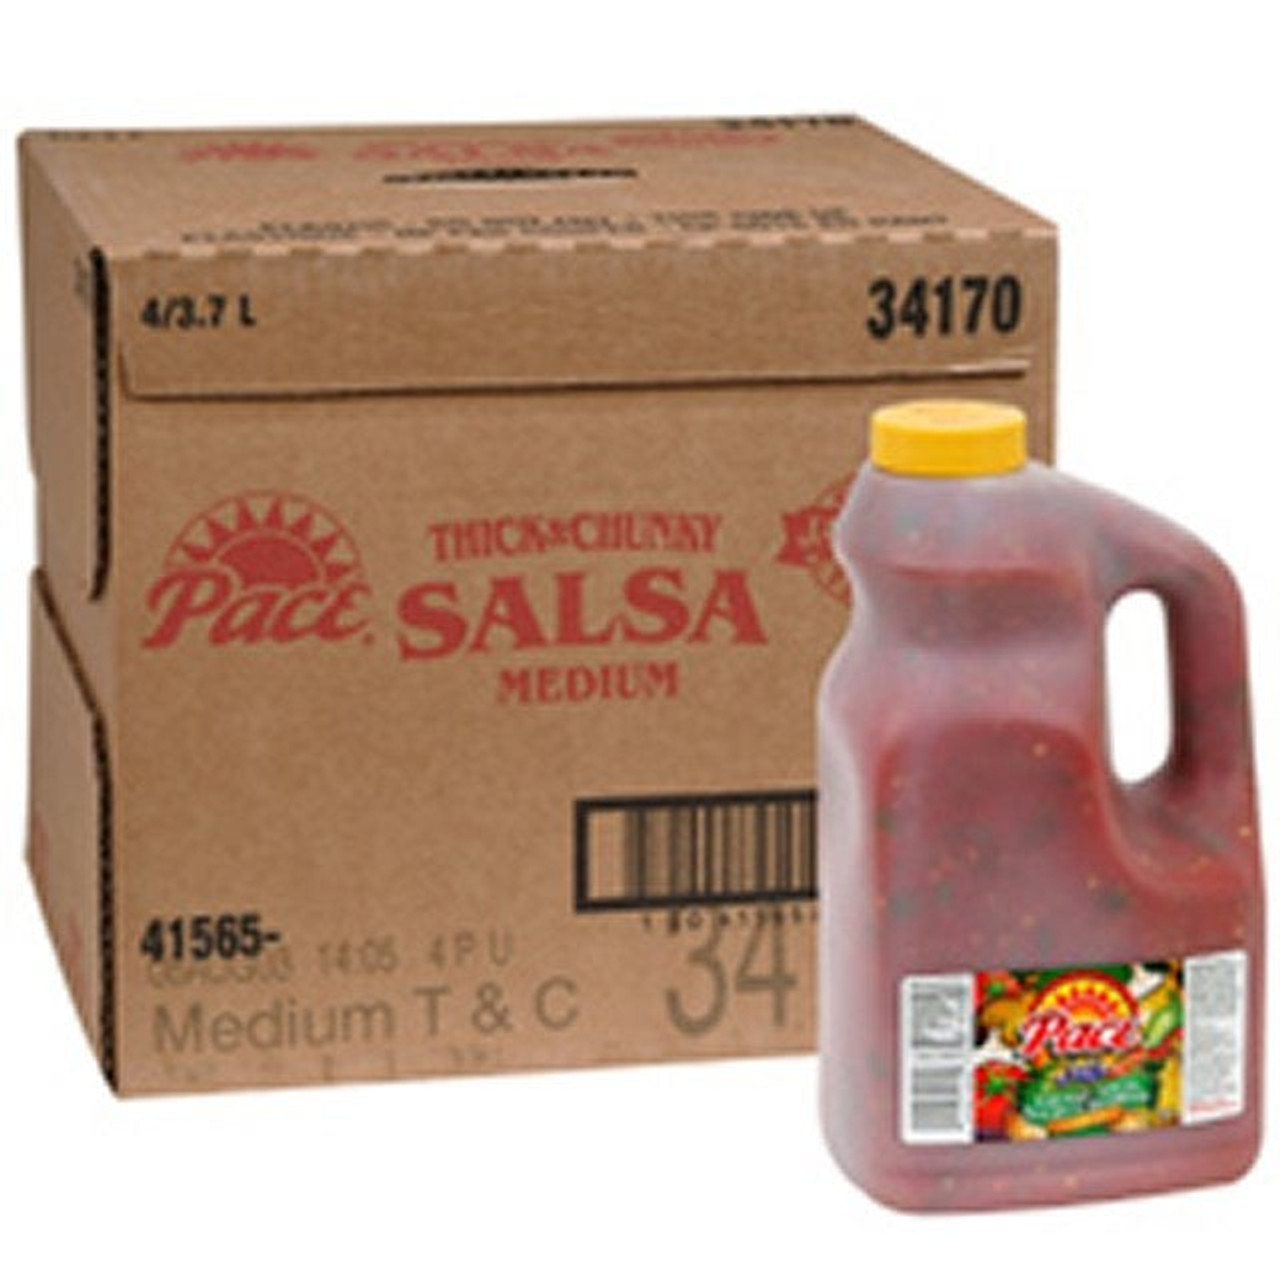 PACE Thick And Chunky Medium Salsa